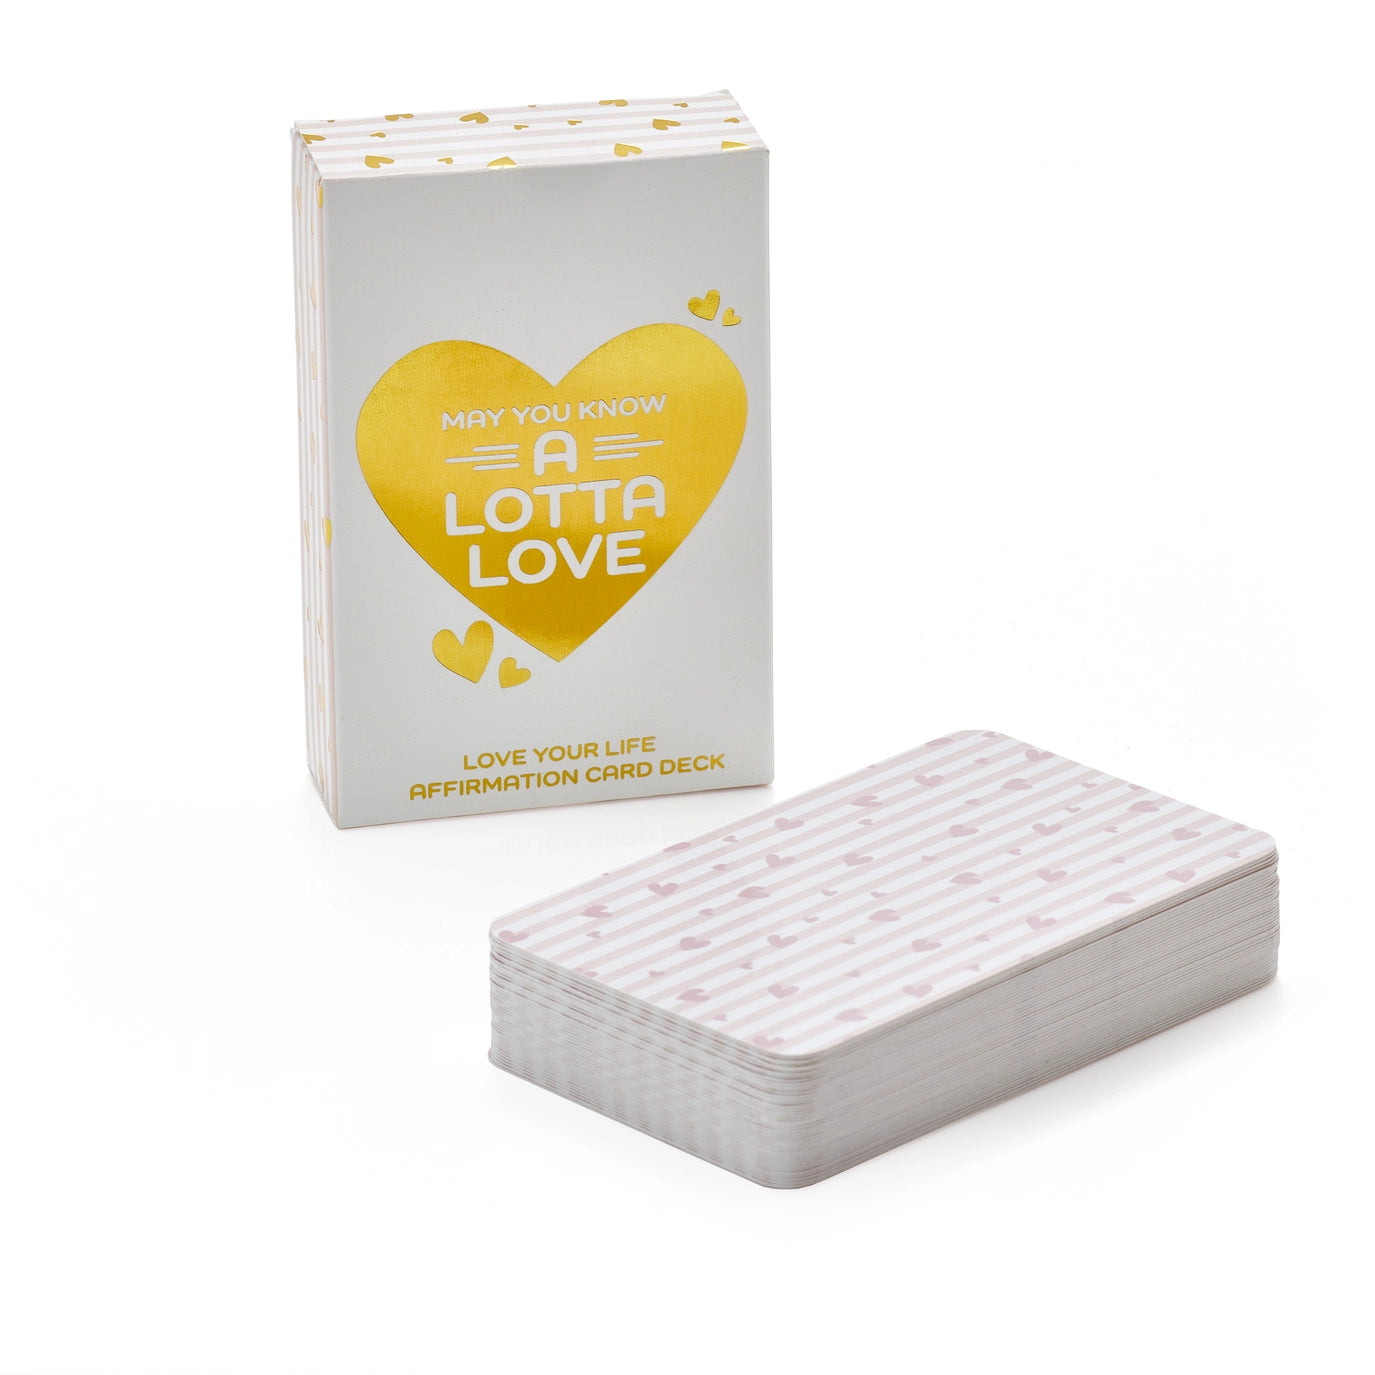 May You Know a Lotta Love Meditation Cards